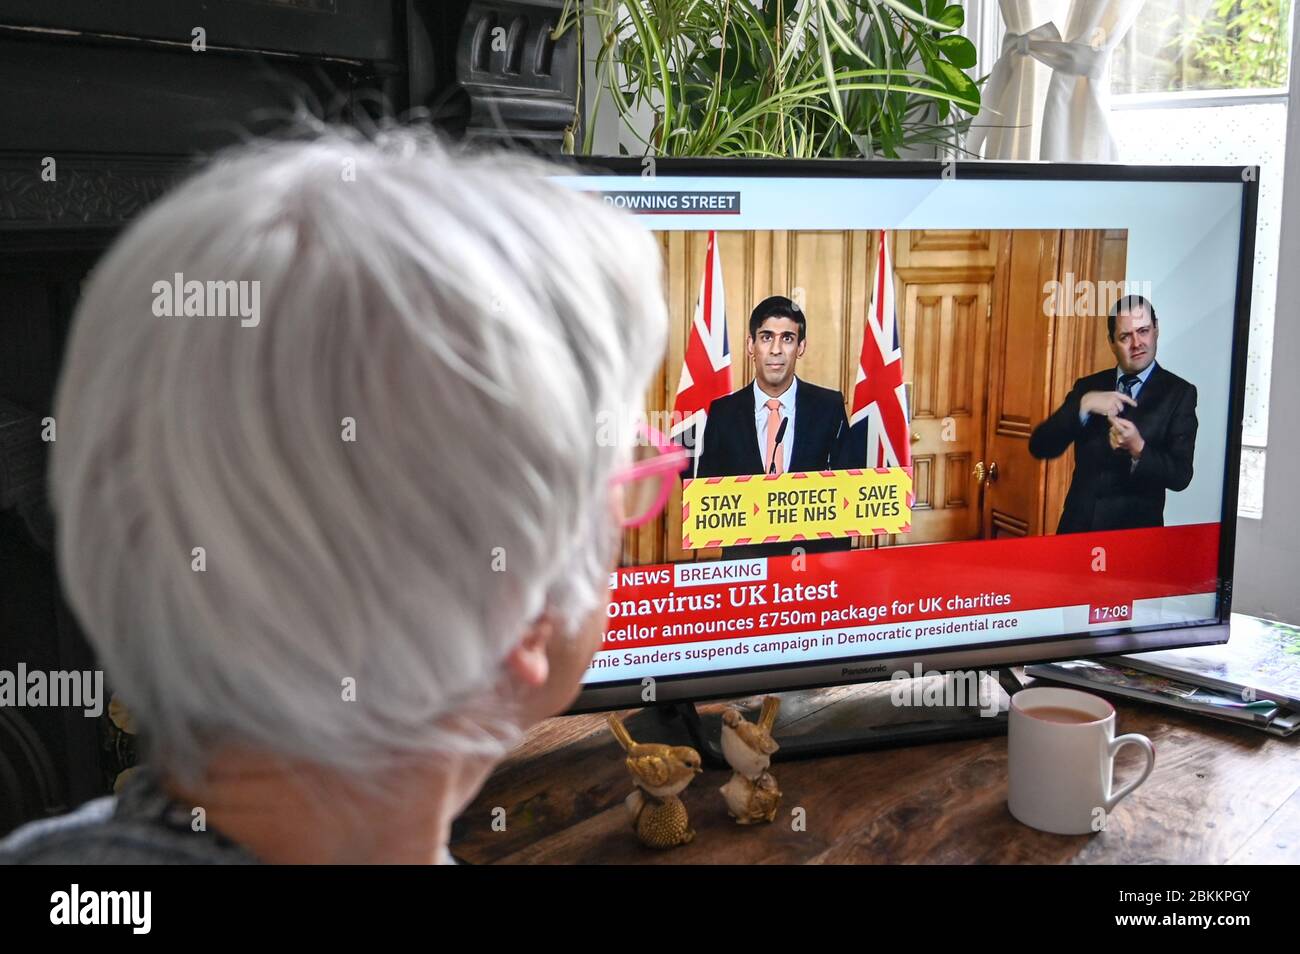 Rishi Sunak, Chancellor of the Exchequer on the televised daily government Covid-19 press conference; watched by a viewer. Stock Photo